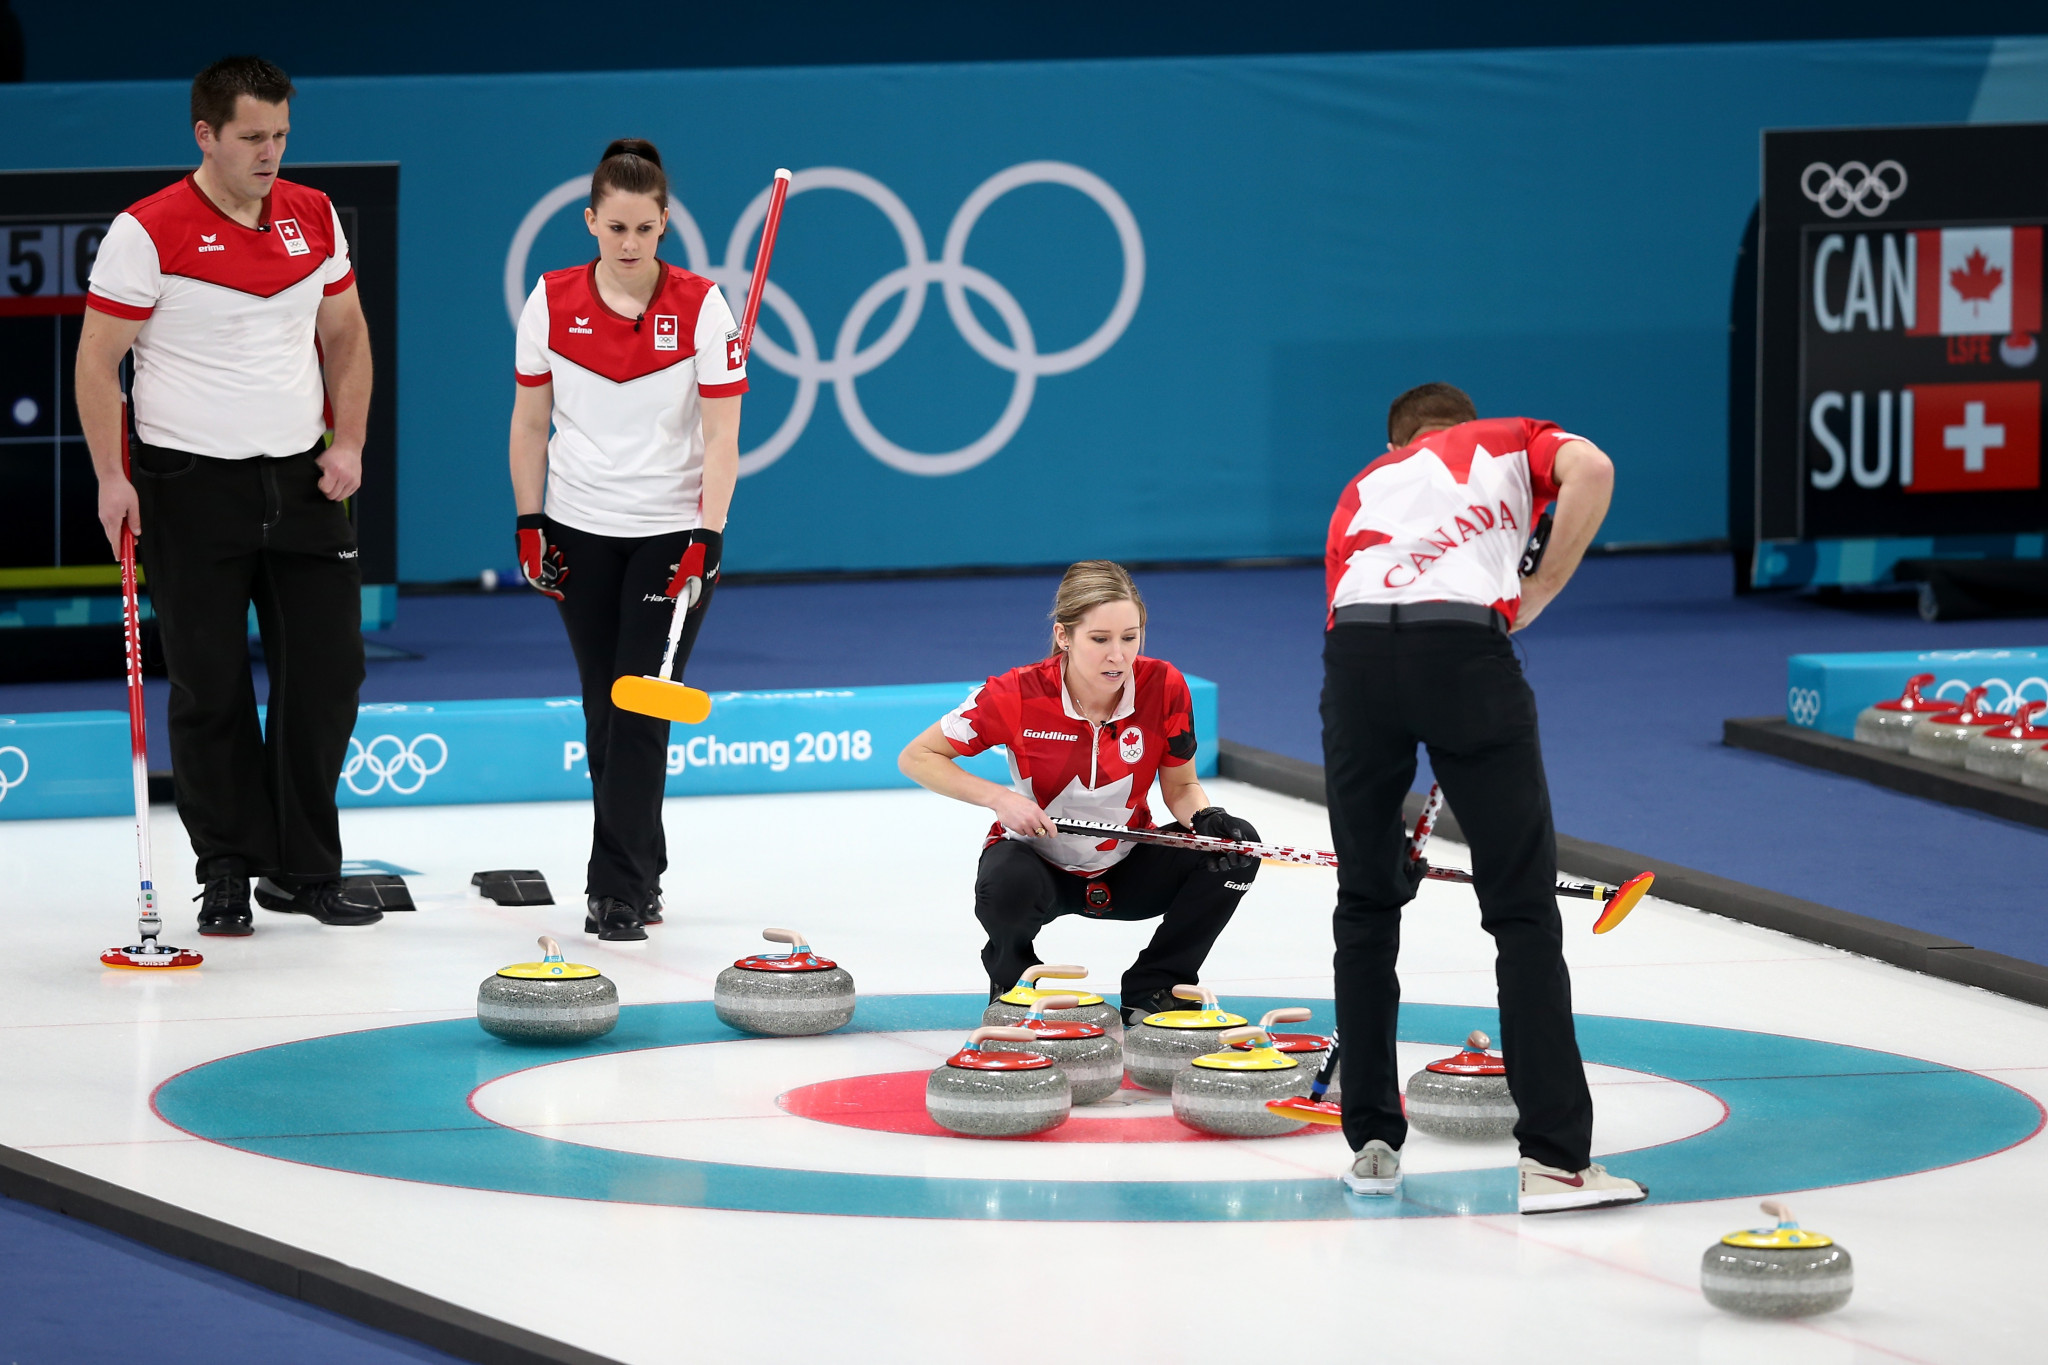 Mixed doubles curling made its Olympic debut at Pyeongchang 2018 but Britain did not qualify ©Getty Images